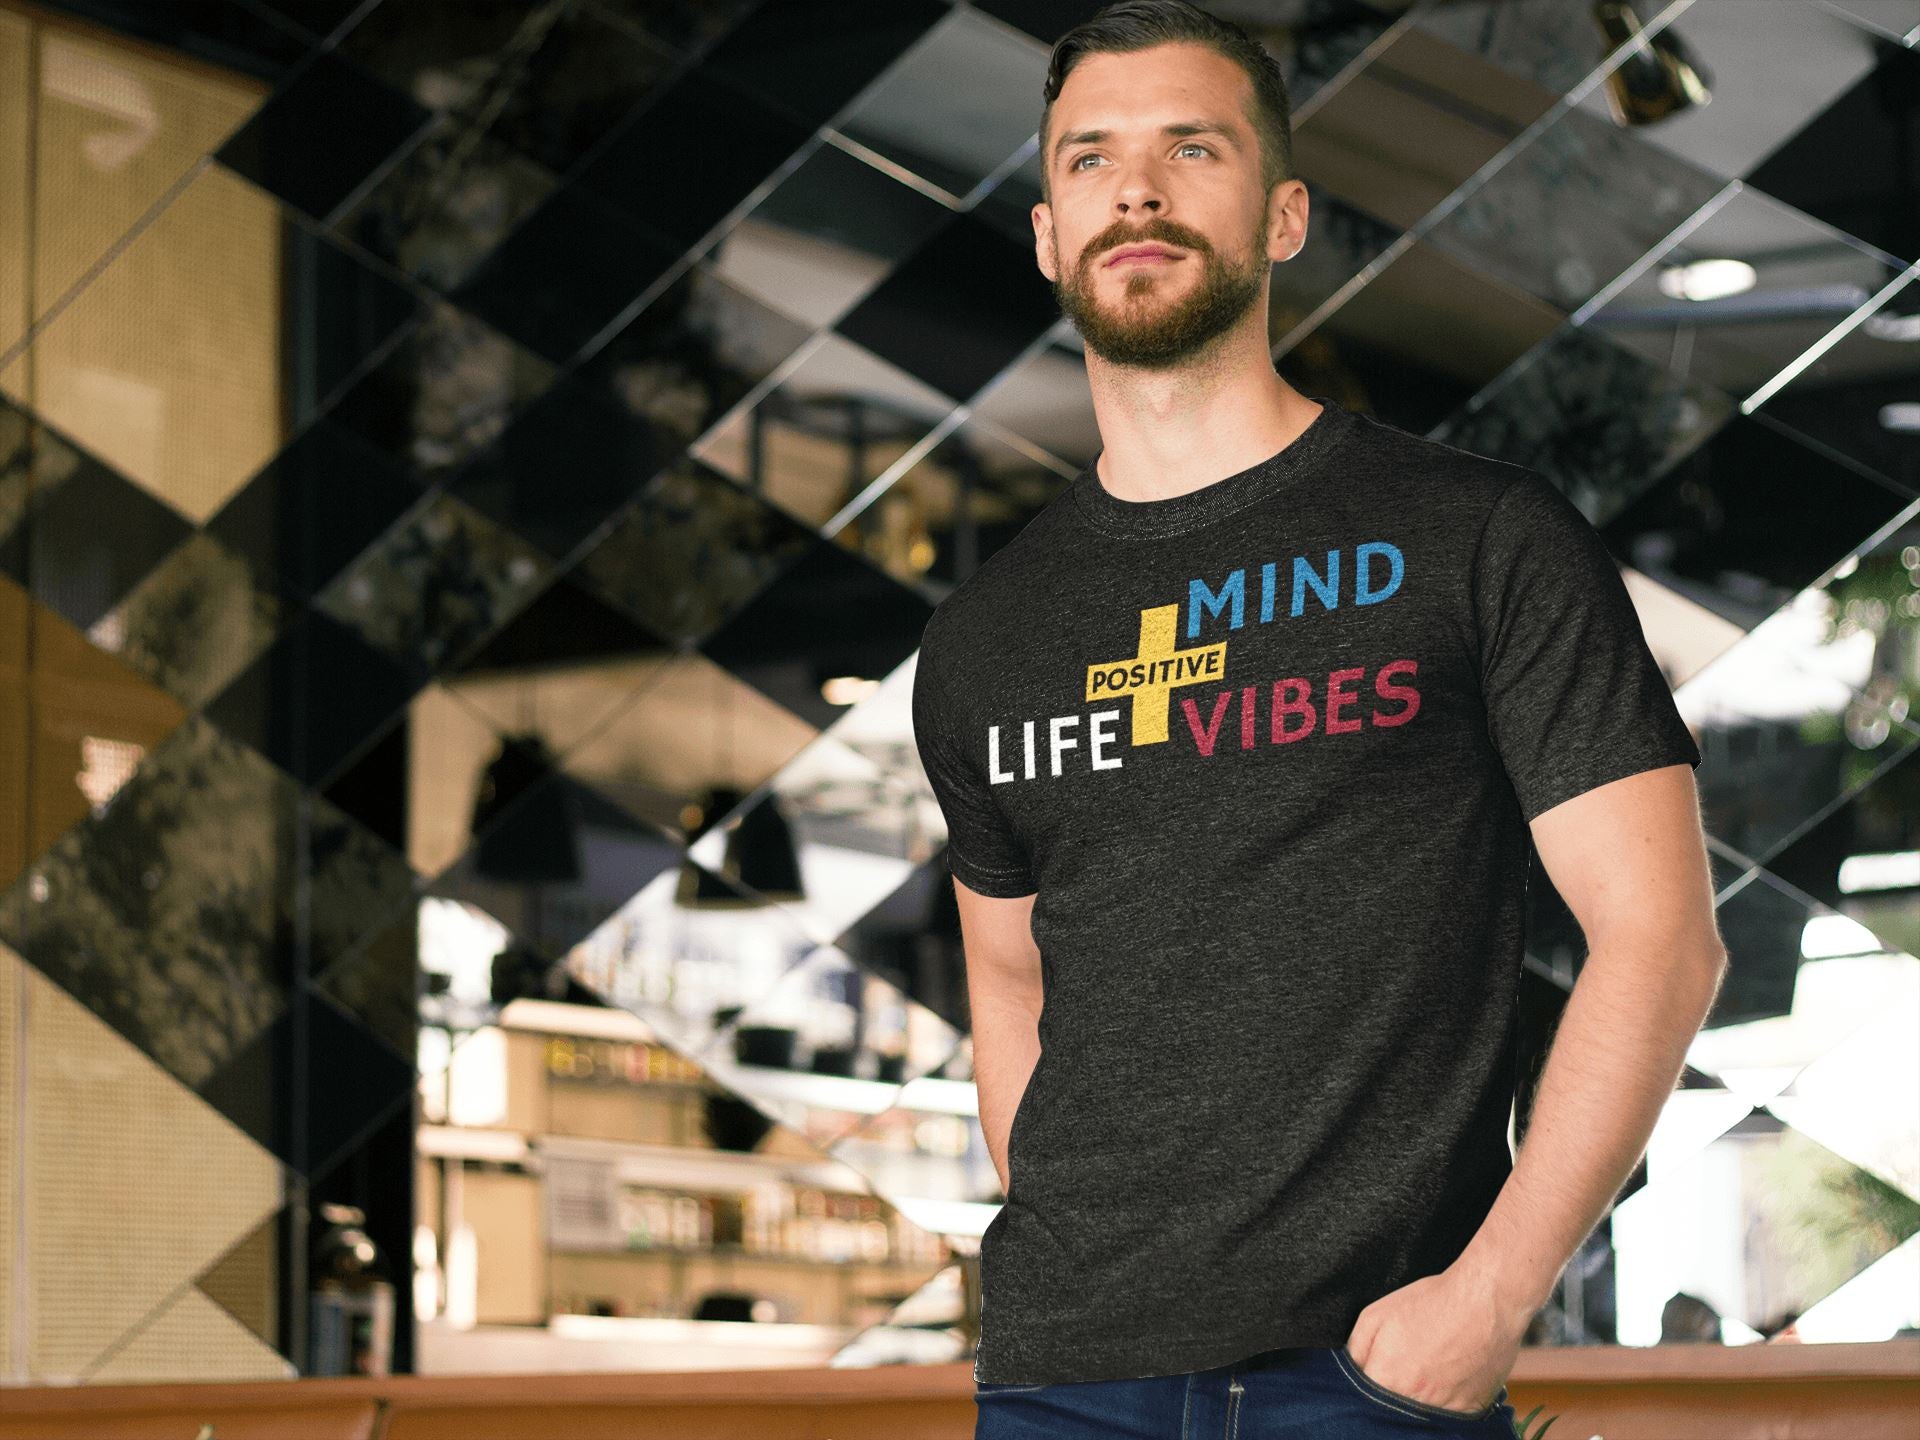 Positive Life Mind Vibes Special Black T Shirt for Men and Women - Catch My Drift India  activewear, beachwear, black, clothing, general, gym, made in india, shirt, t shirt, trending, tshirt,